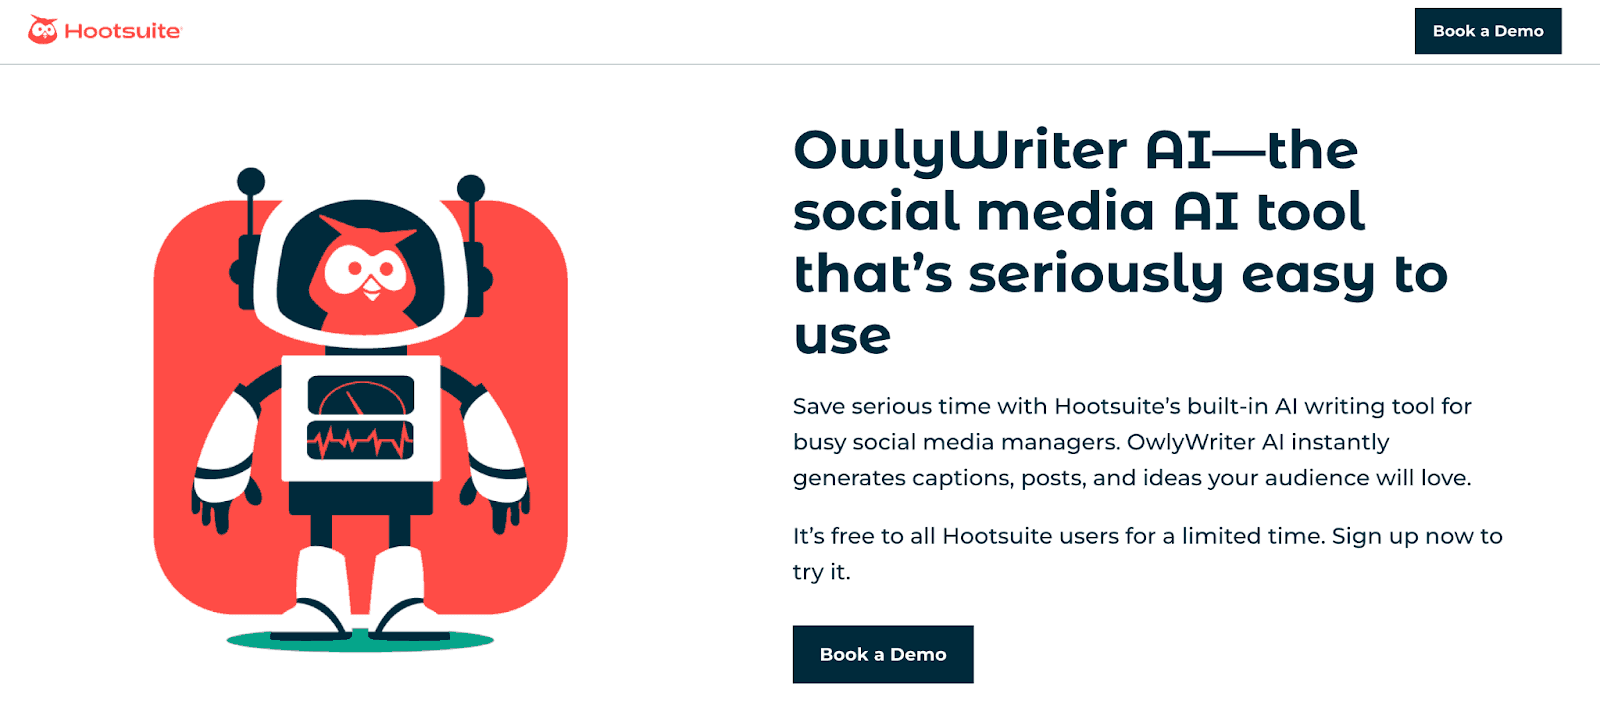 Hootsuite website - OwlyWriter AI- the social media AI tool that's seriously easy to use